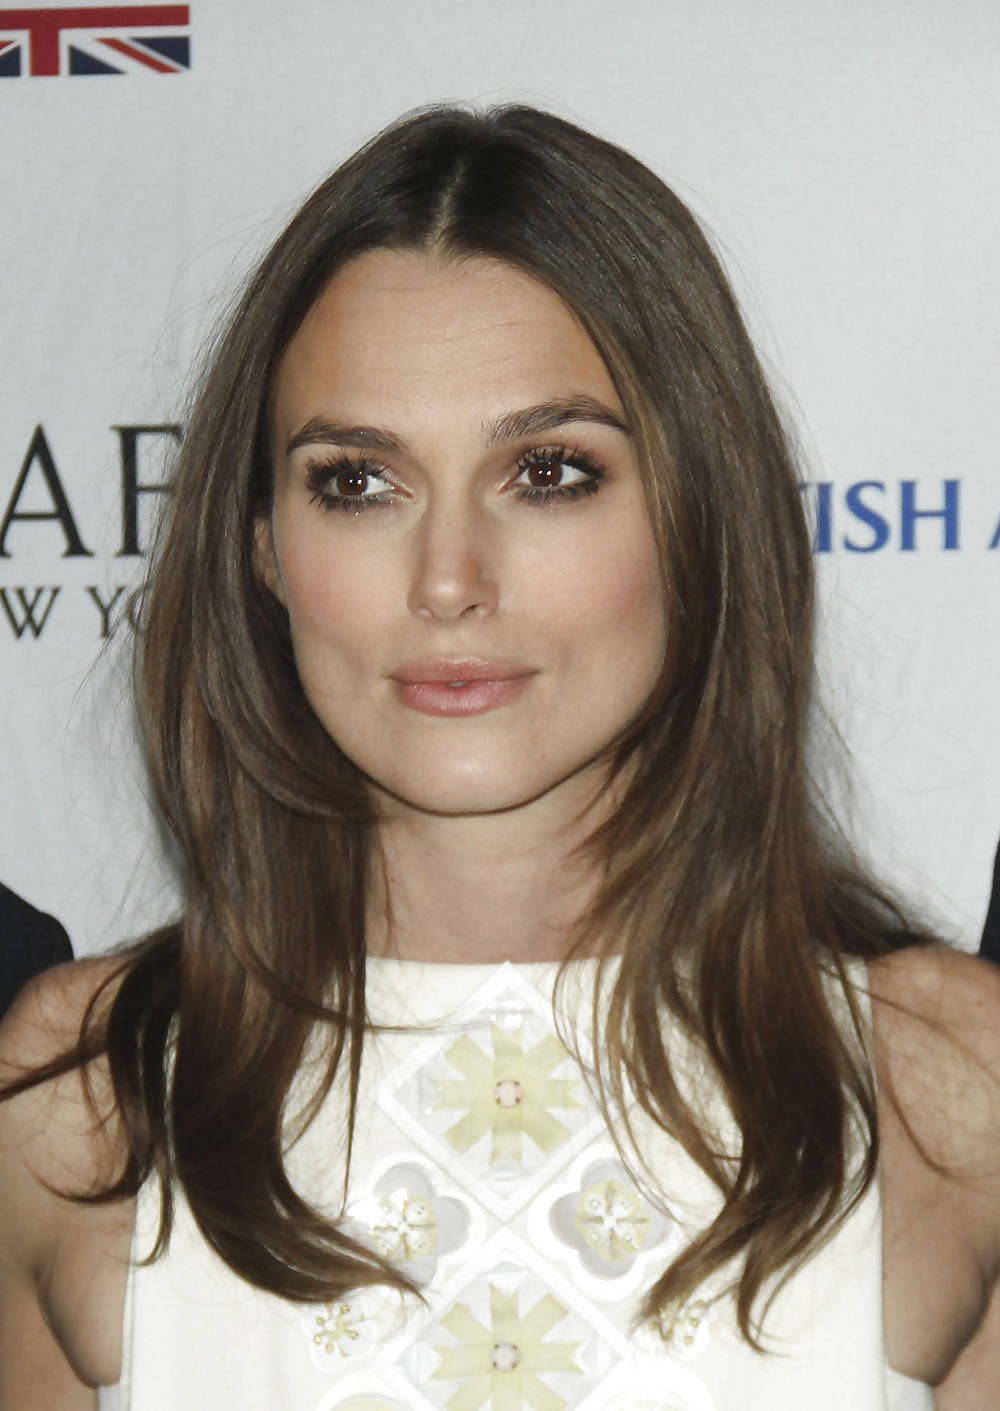 Keira Knightley The Royal Lady of England #35649298